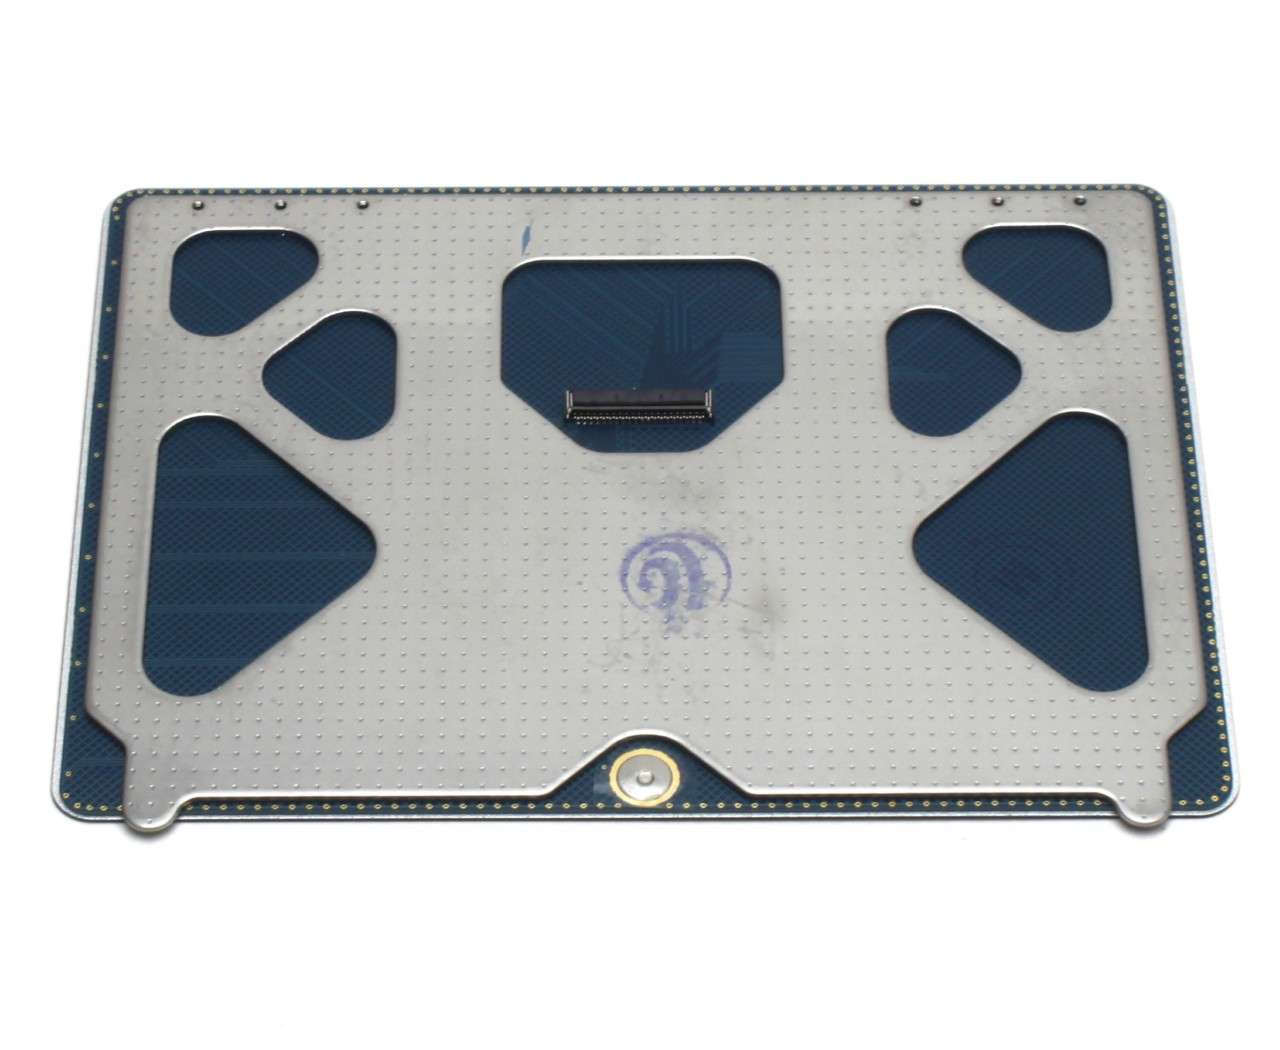 Touchpad Apple Macbook Pro 17 A1297 Mid 2010 Trackpad image6